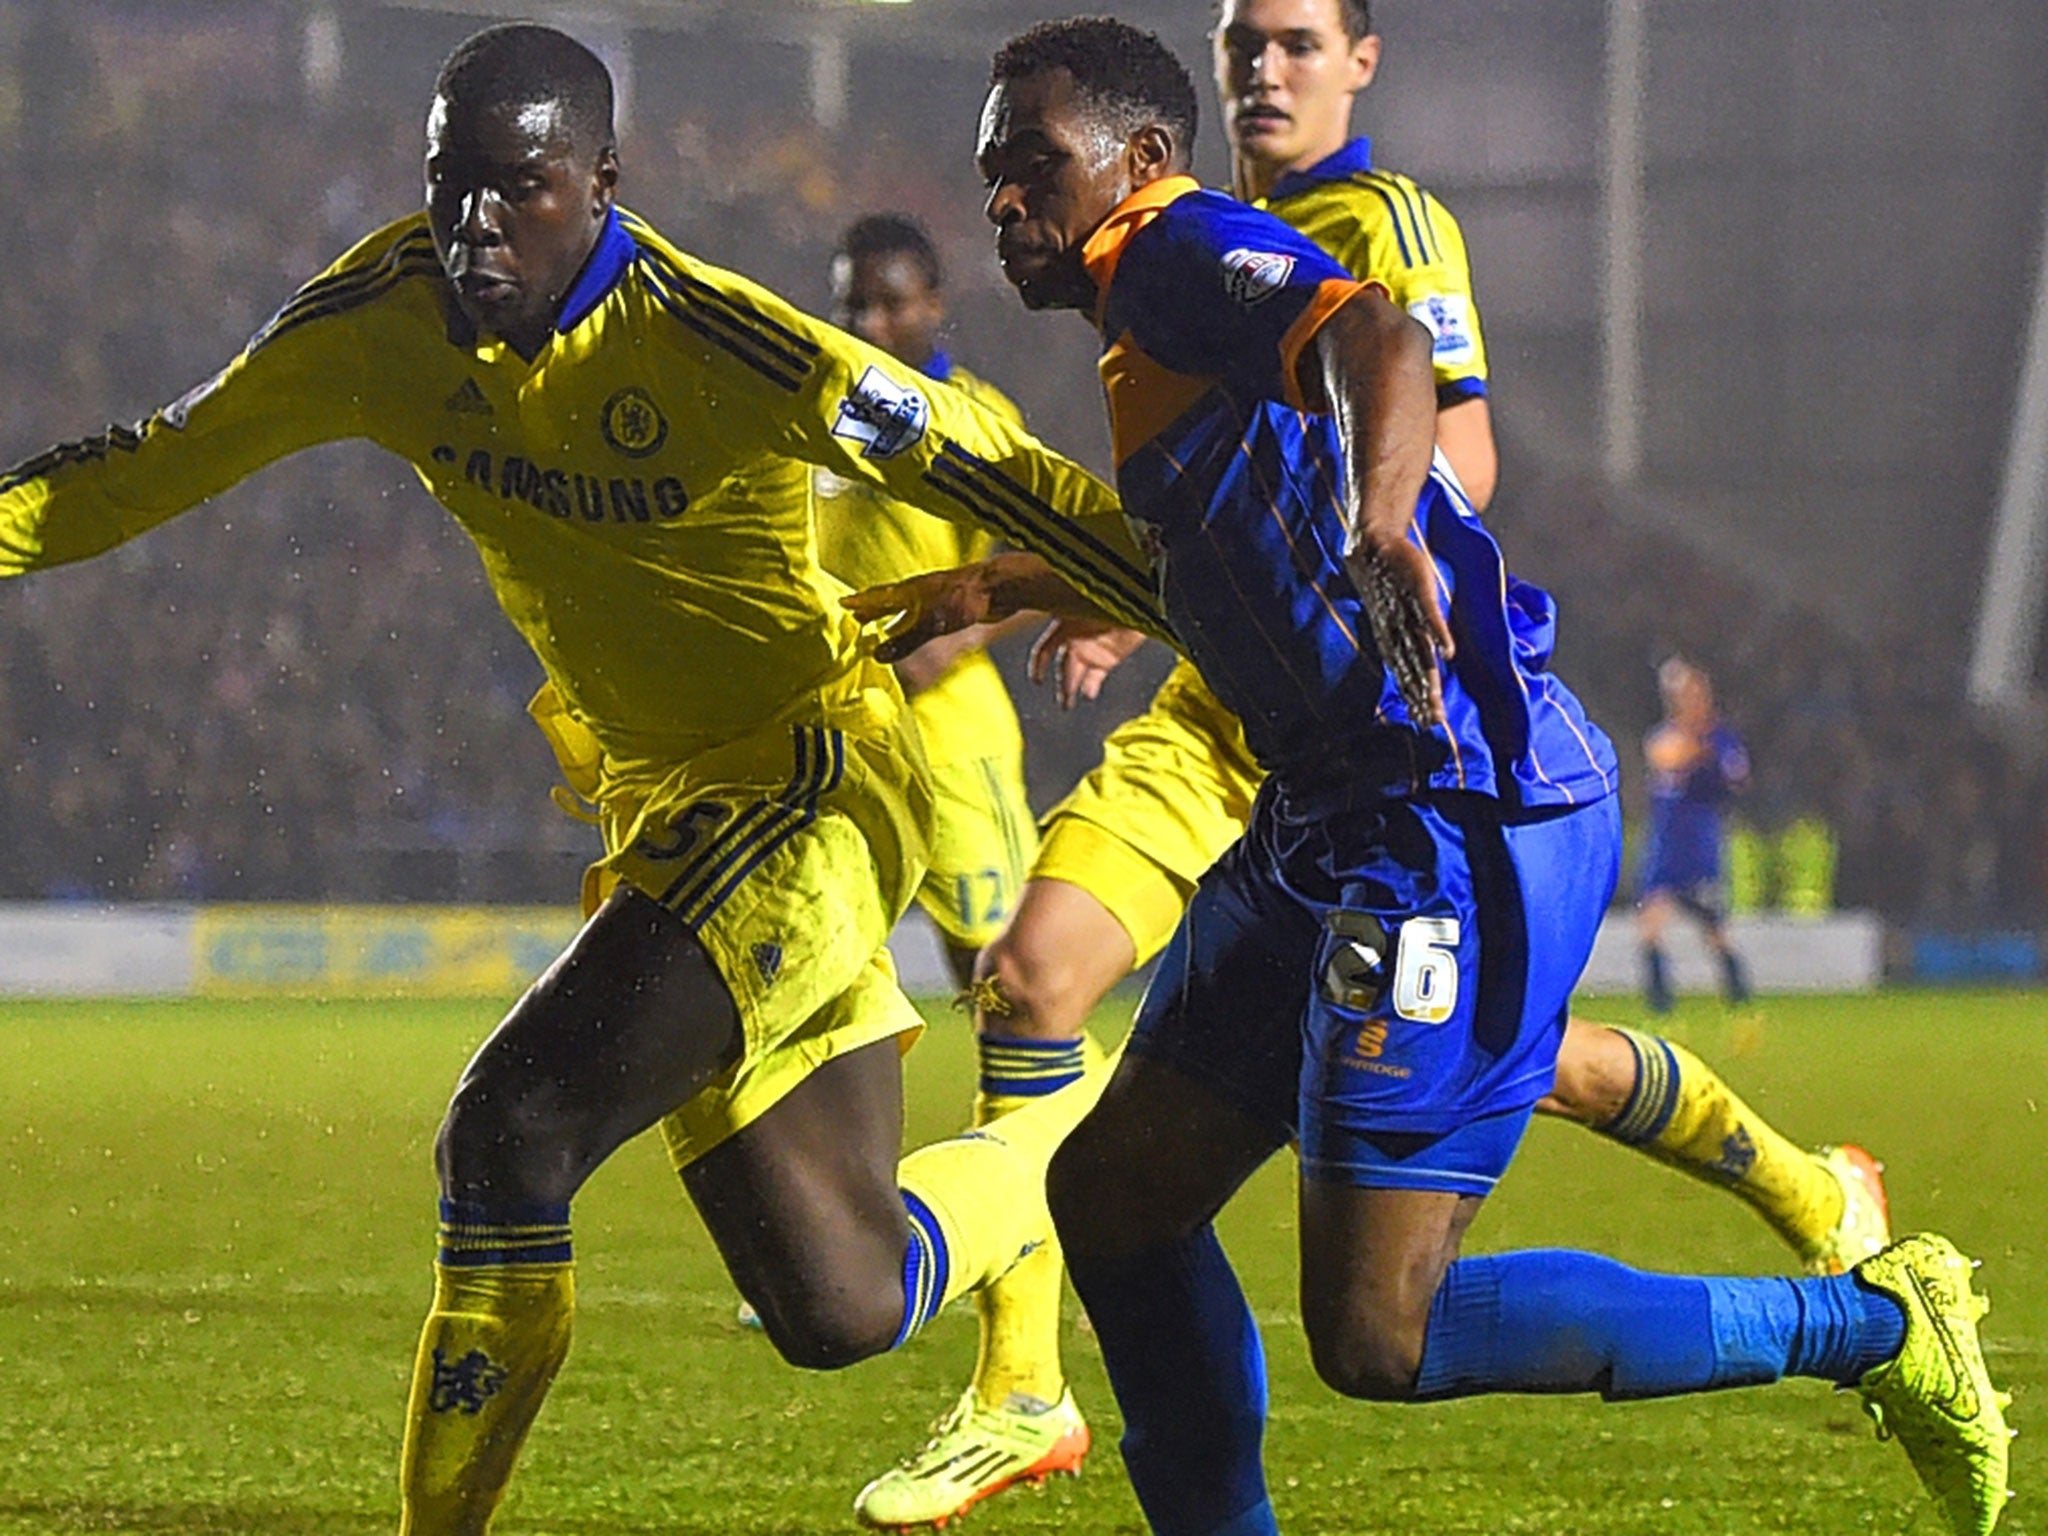 Kurt Zouma, of Chelsea, keeps Shrewsbury’s Jean-Louis Akpa Akpro (right) in check during an impressive performance from Jose Mourinho’s fringe playe